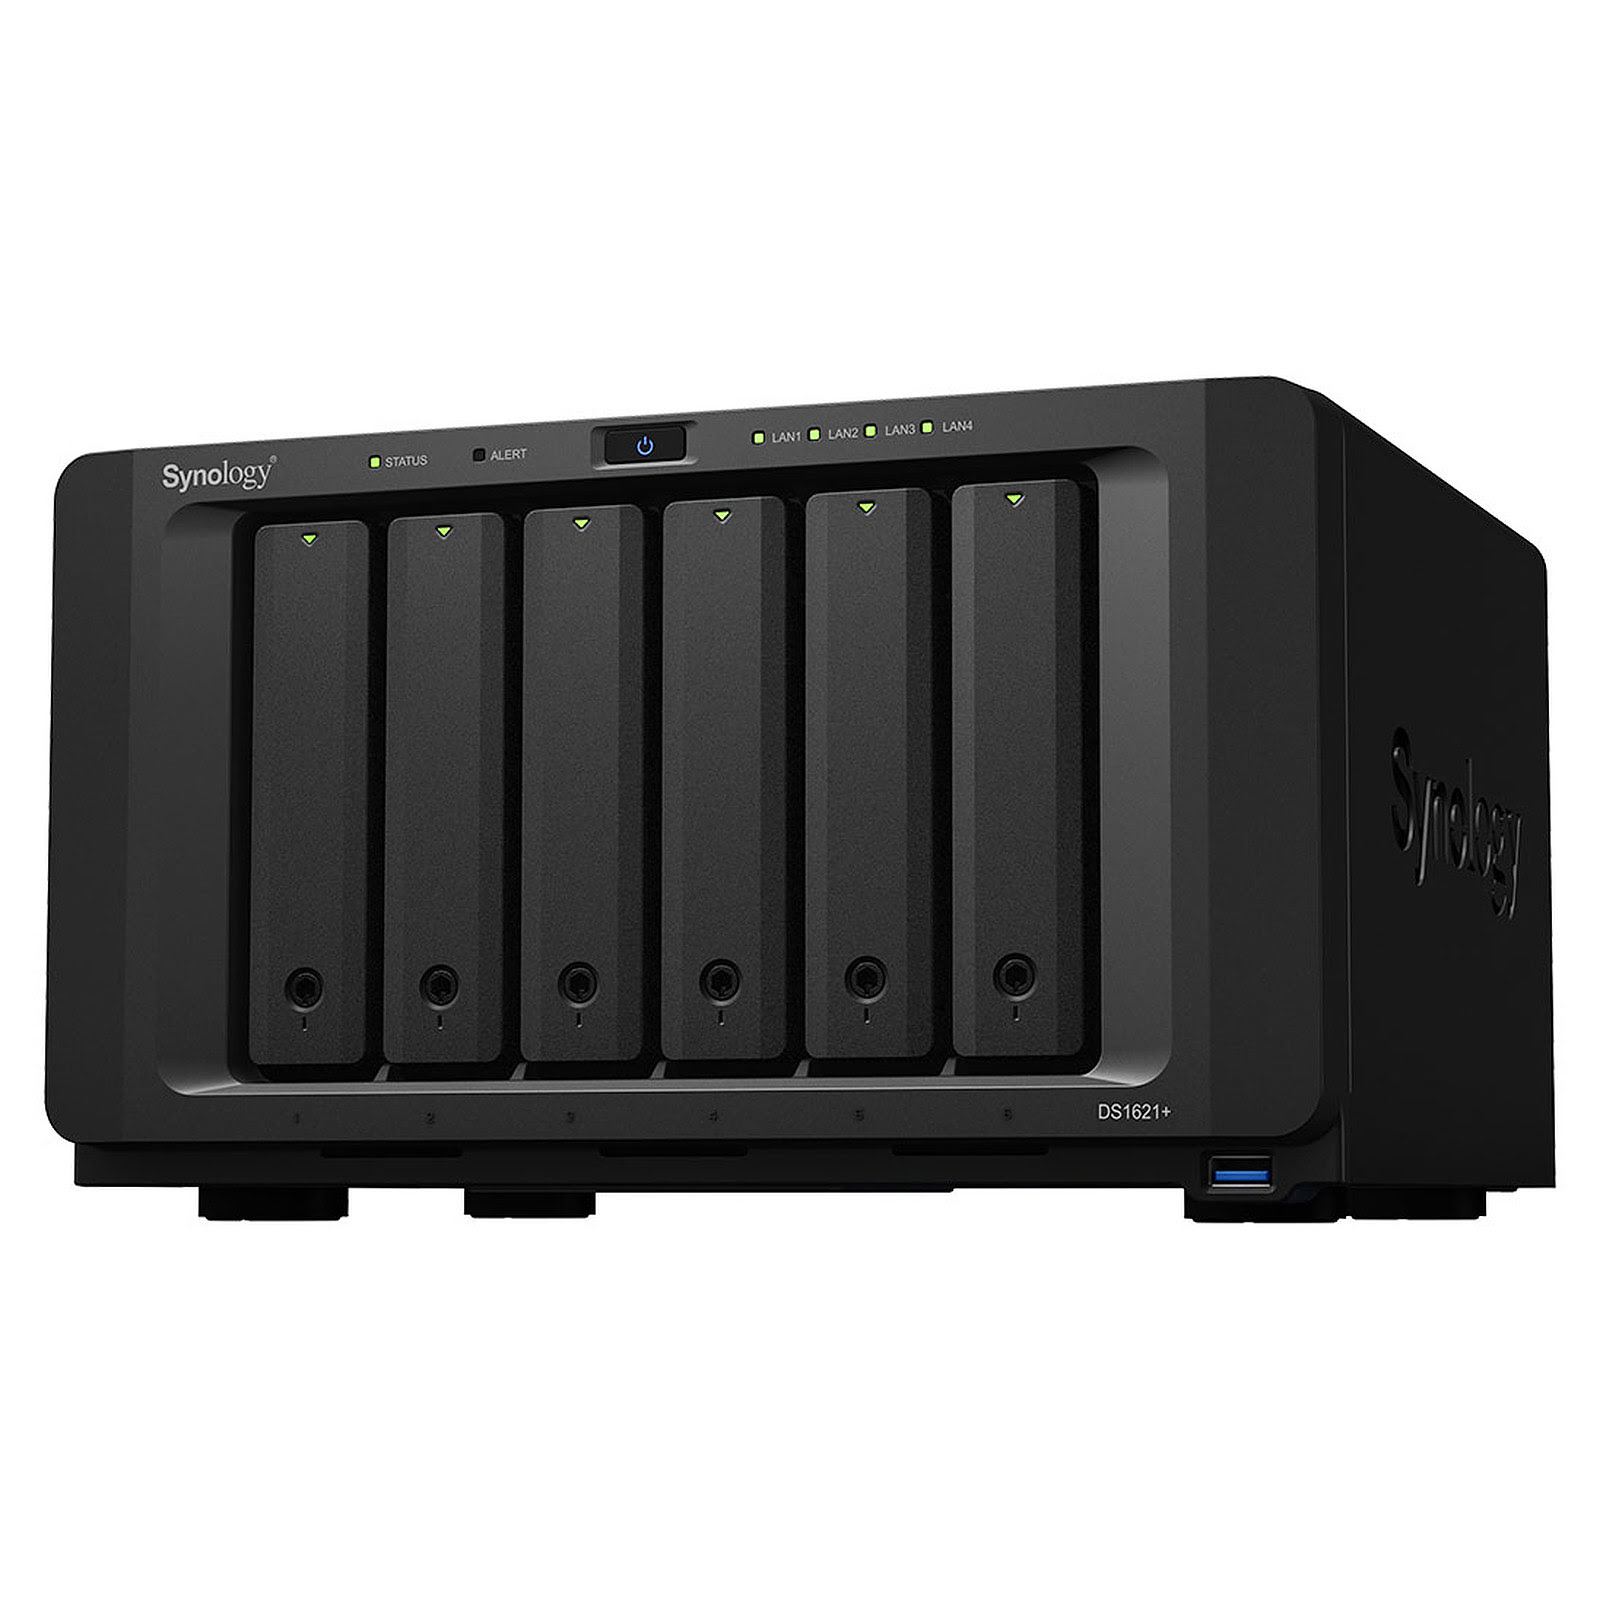 Synology DS1621+ - 6 Baies  - Serveur NAS Synology - grosbill-pro.com - 3